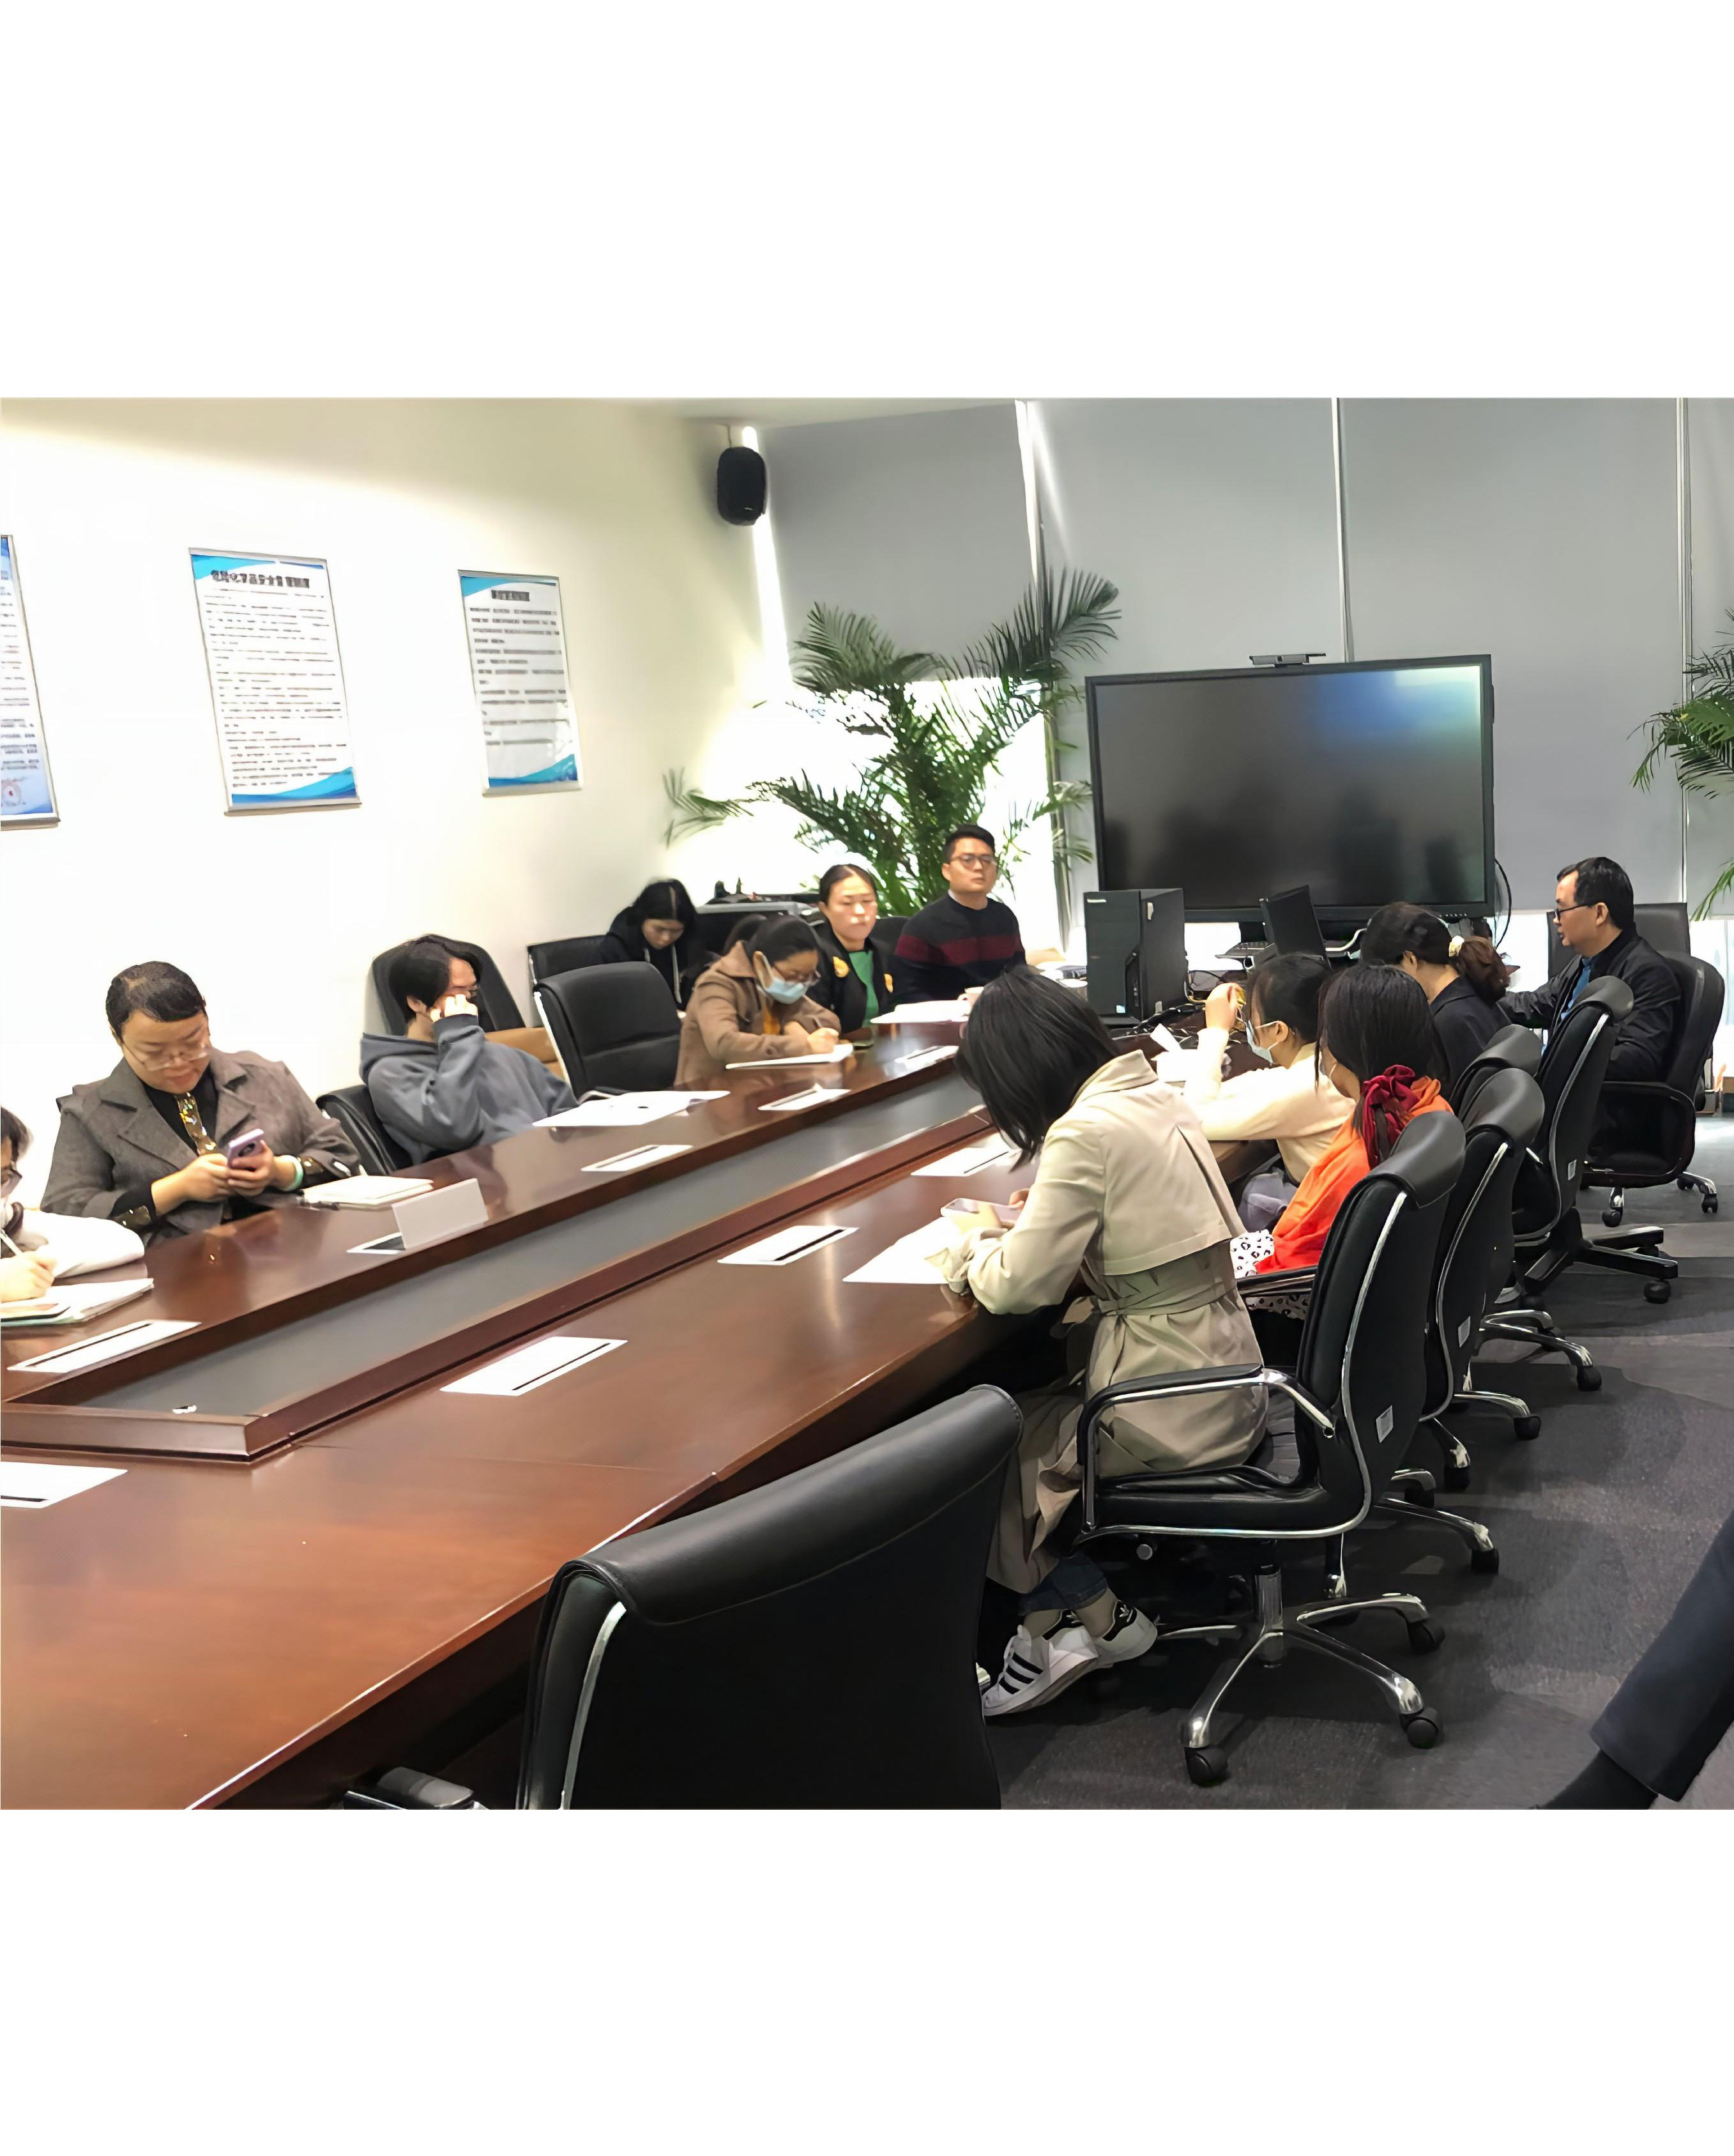 For Training and Solid Foundation, Shenzhen Sunrise New Energy Co., Ltd. Held the Product and Technical Support Training Session